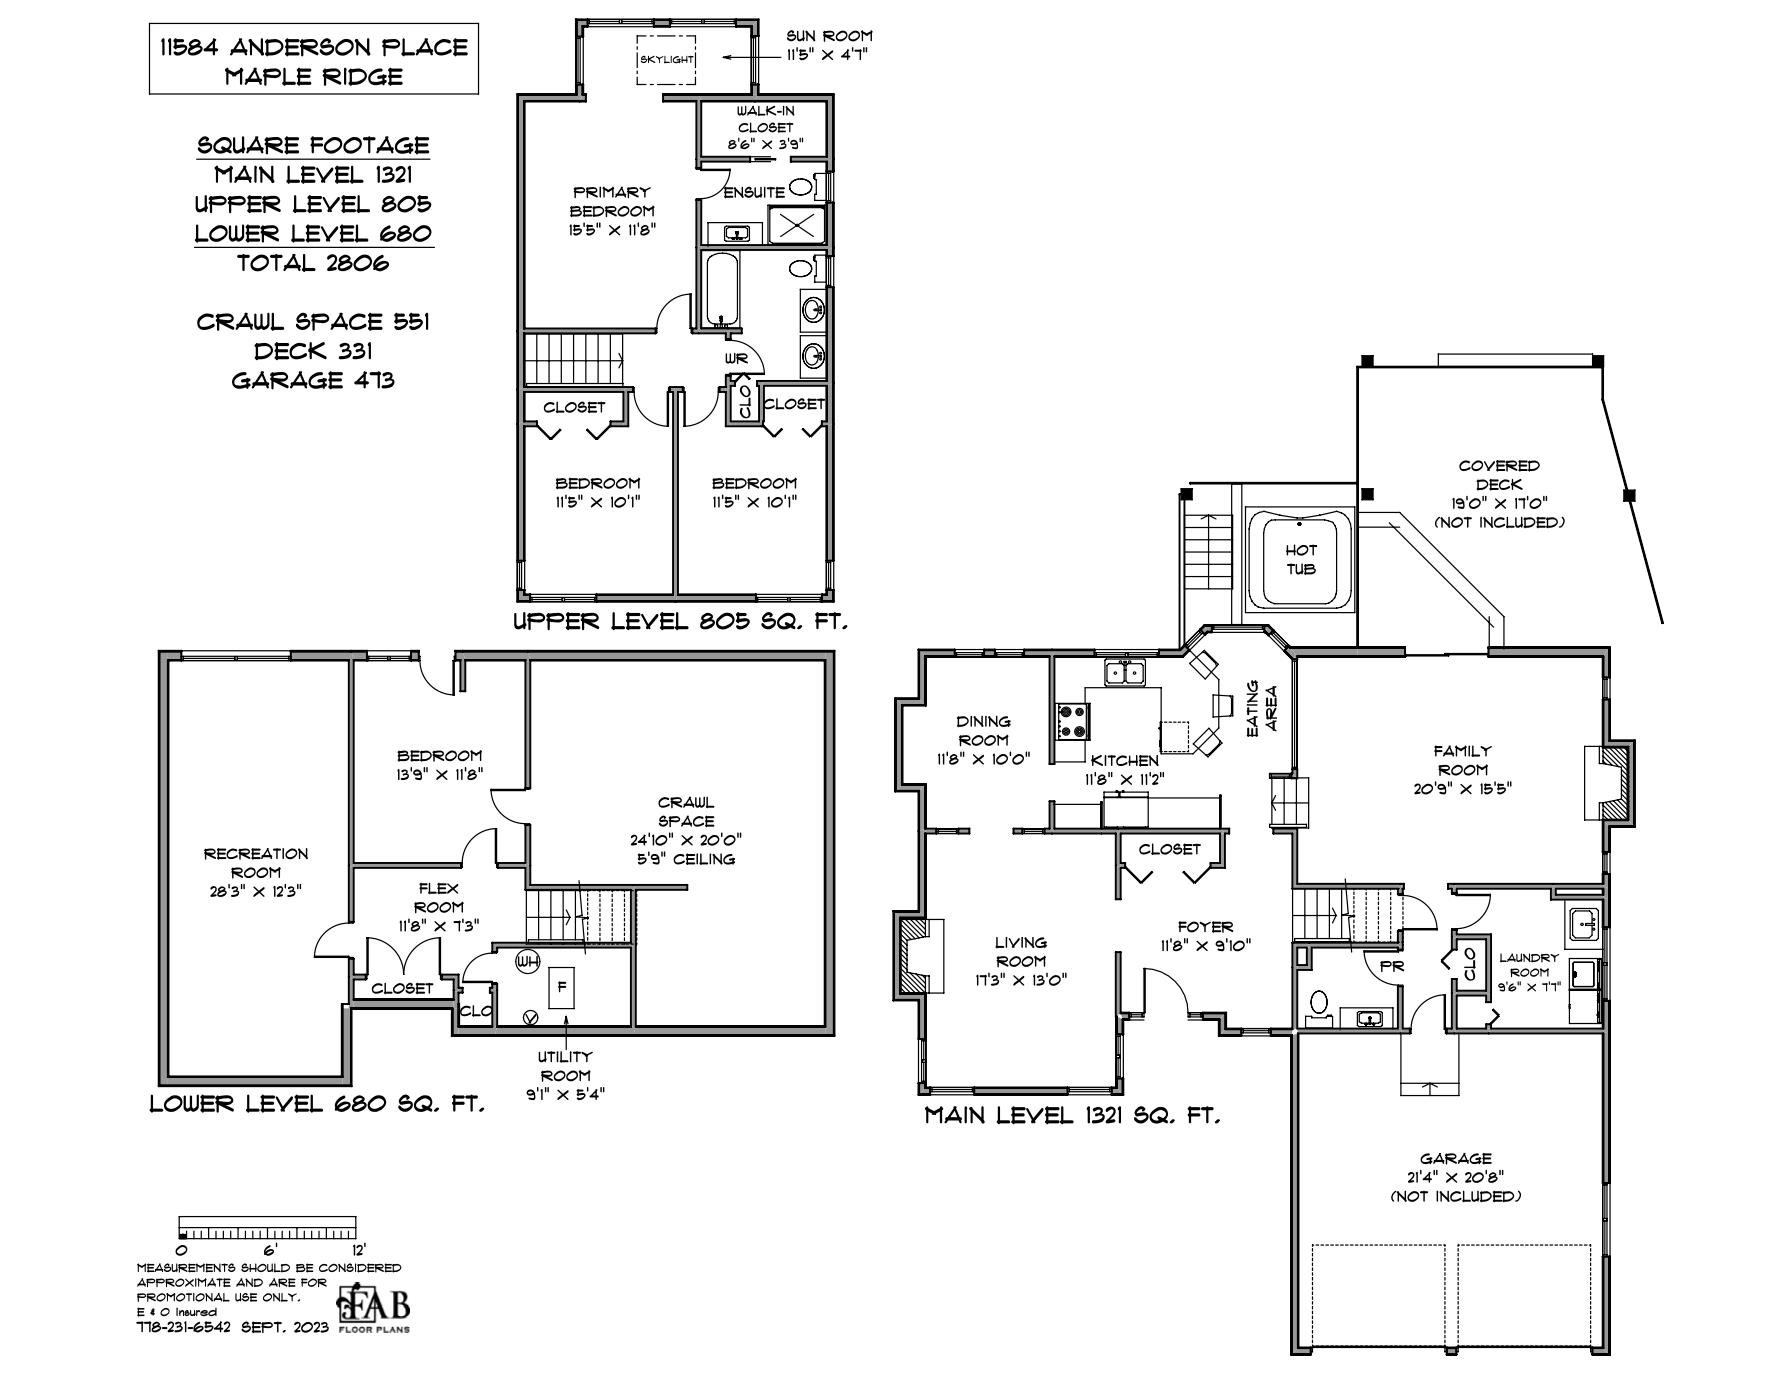 Listing image of 11584 ANDERSON PLACE